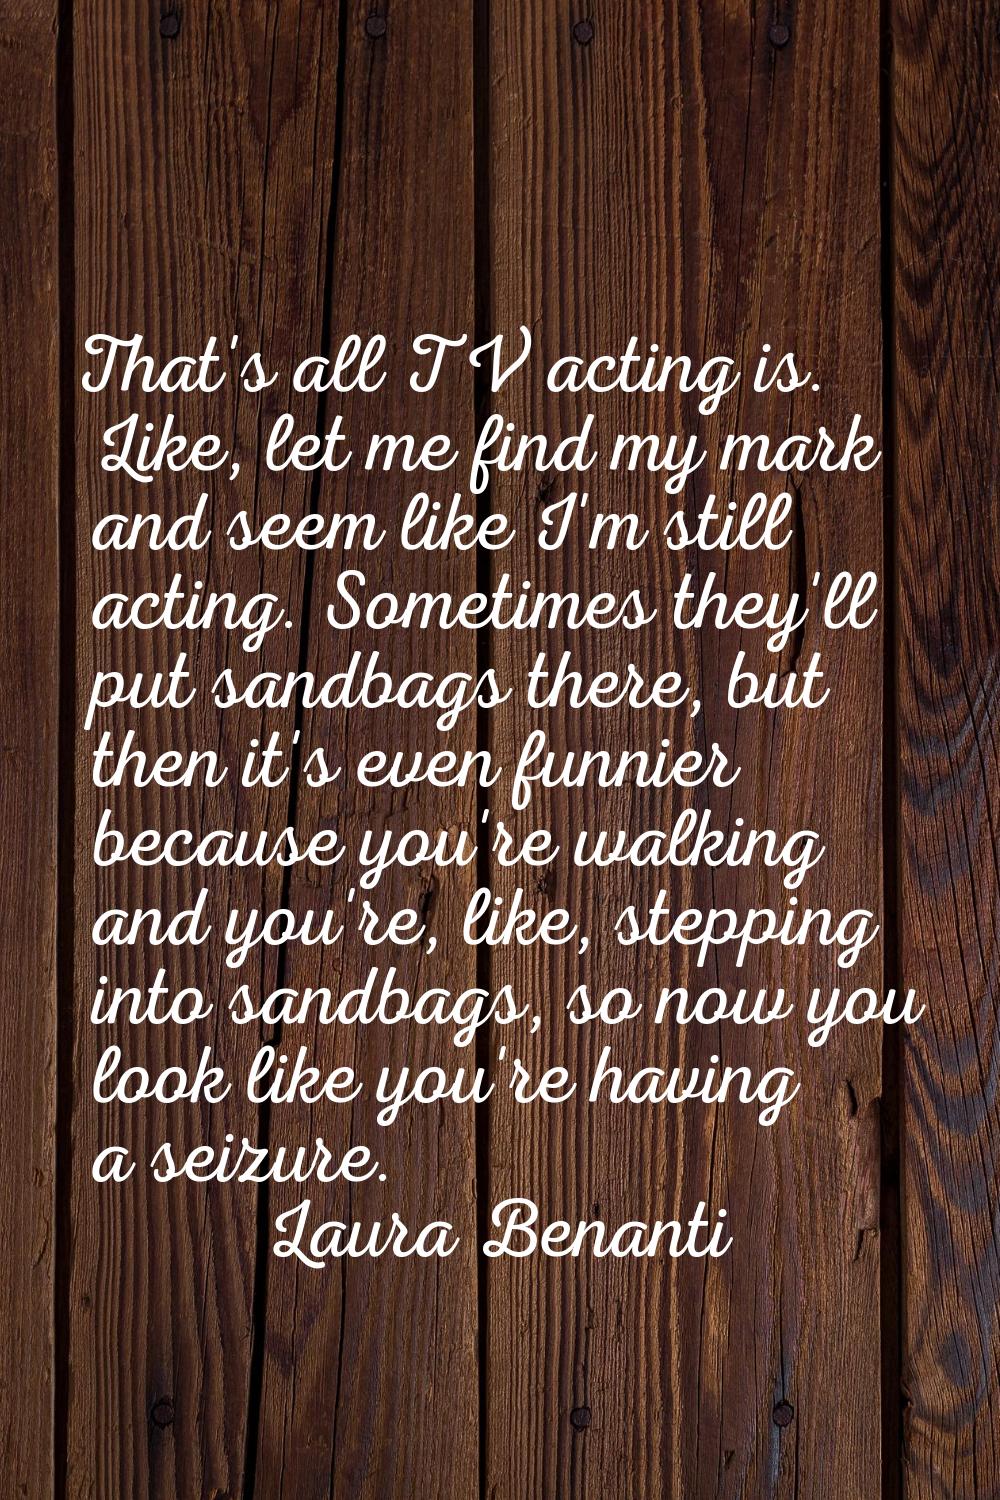 That's all TV acting is. Like, let me find my mark and seem like I'm still acting. Sometimes they'l